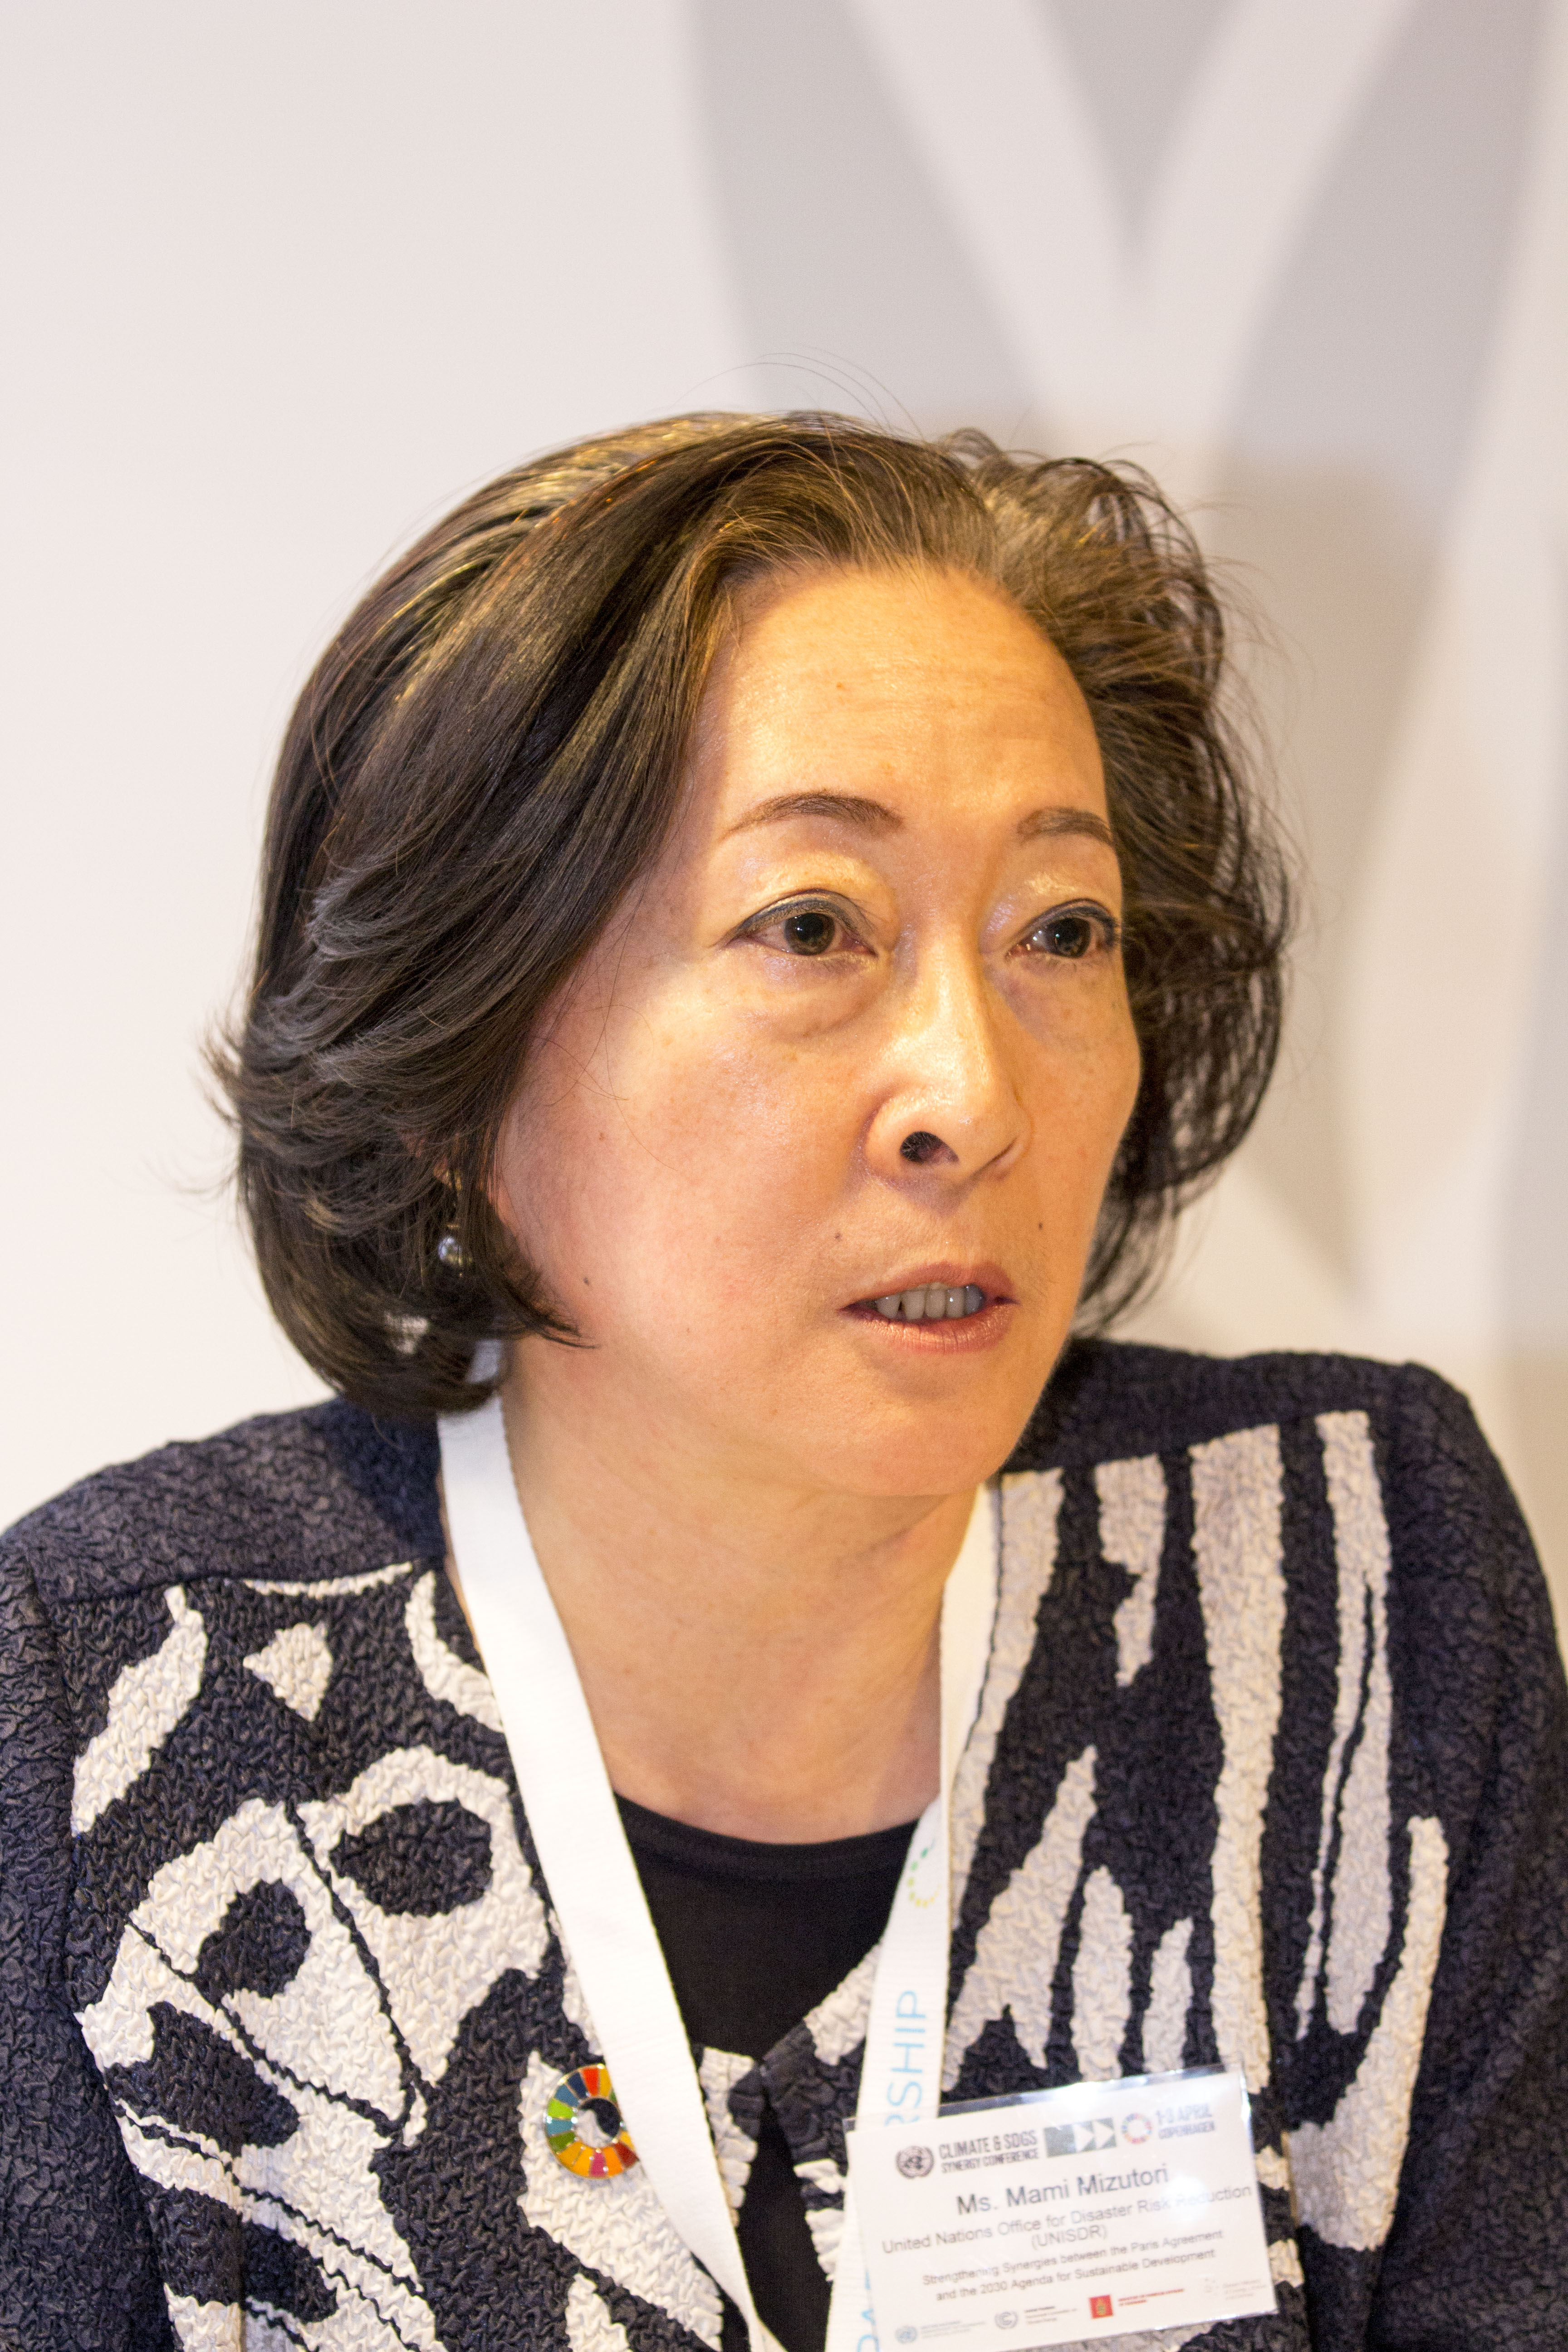 Mami_Mizutori,_Assistant_Secretary-General_and_Special_Representative_of_the_Secretary_General_for_Disaster_Risk_Reduction, addresses media at the press conference.